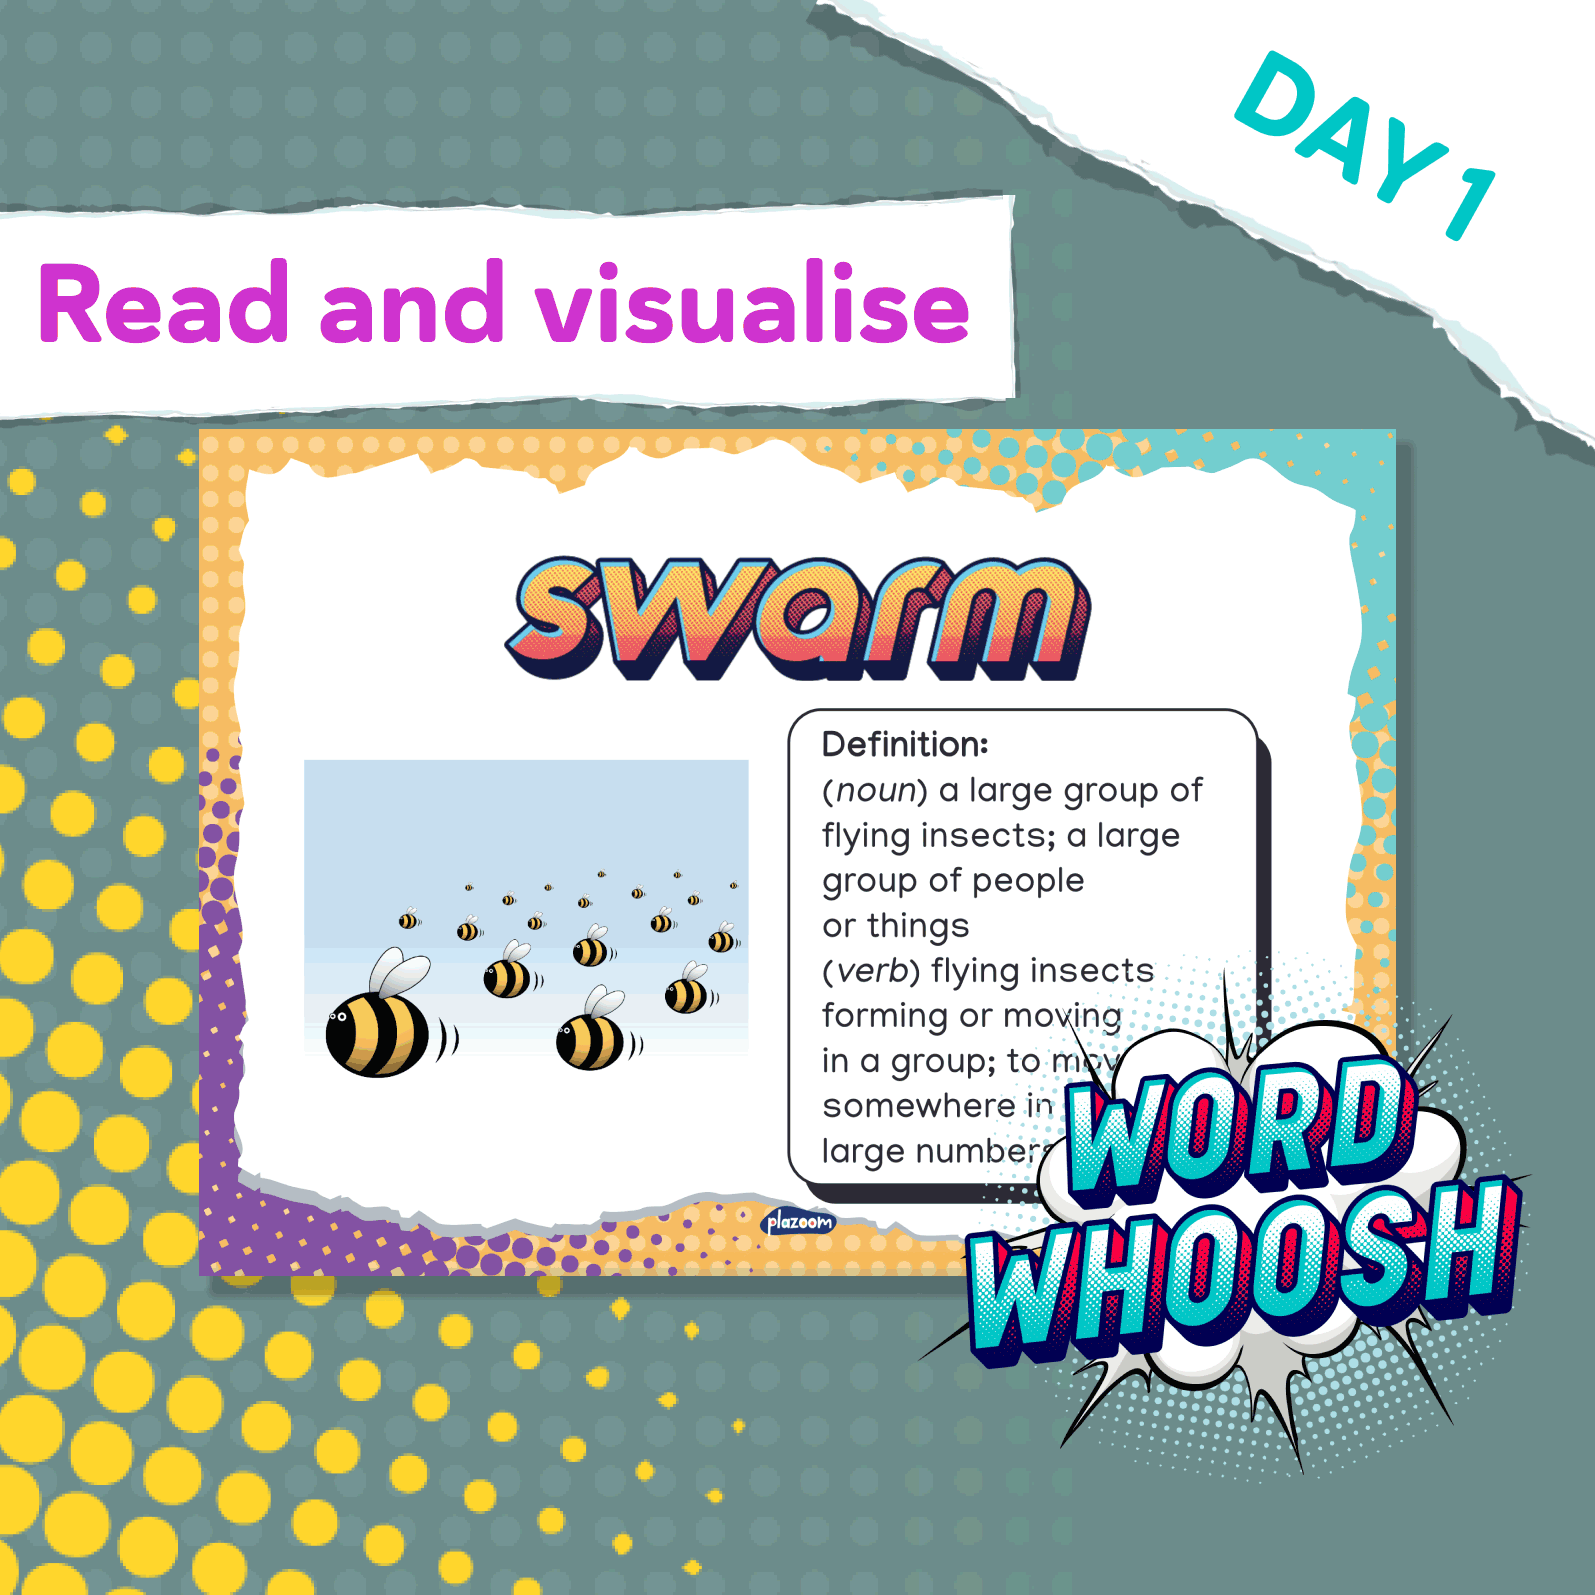 Main Image for How are Word Whoosh activities structured?